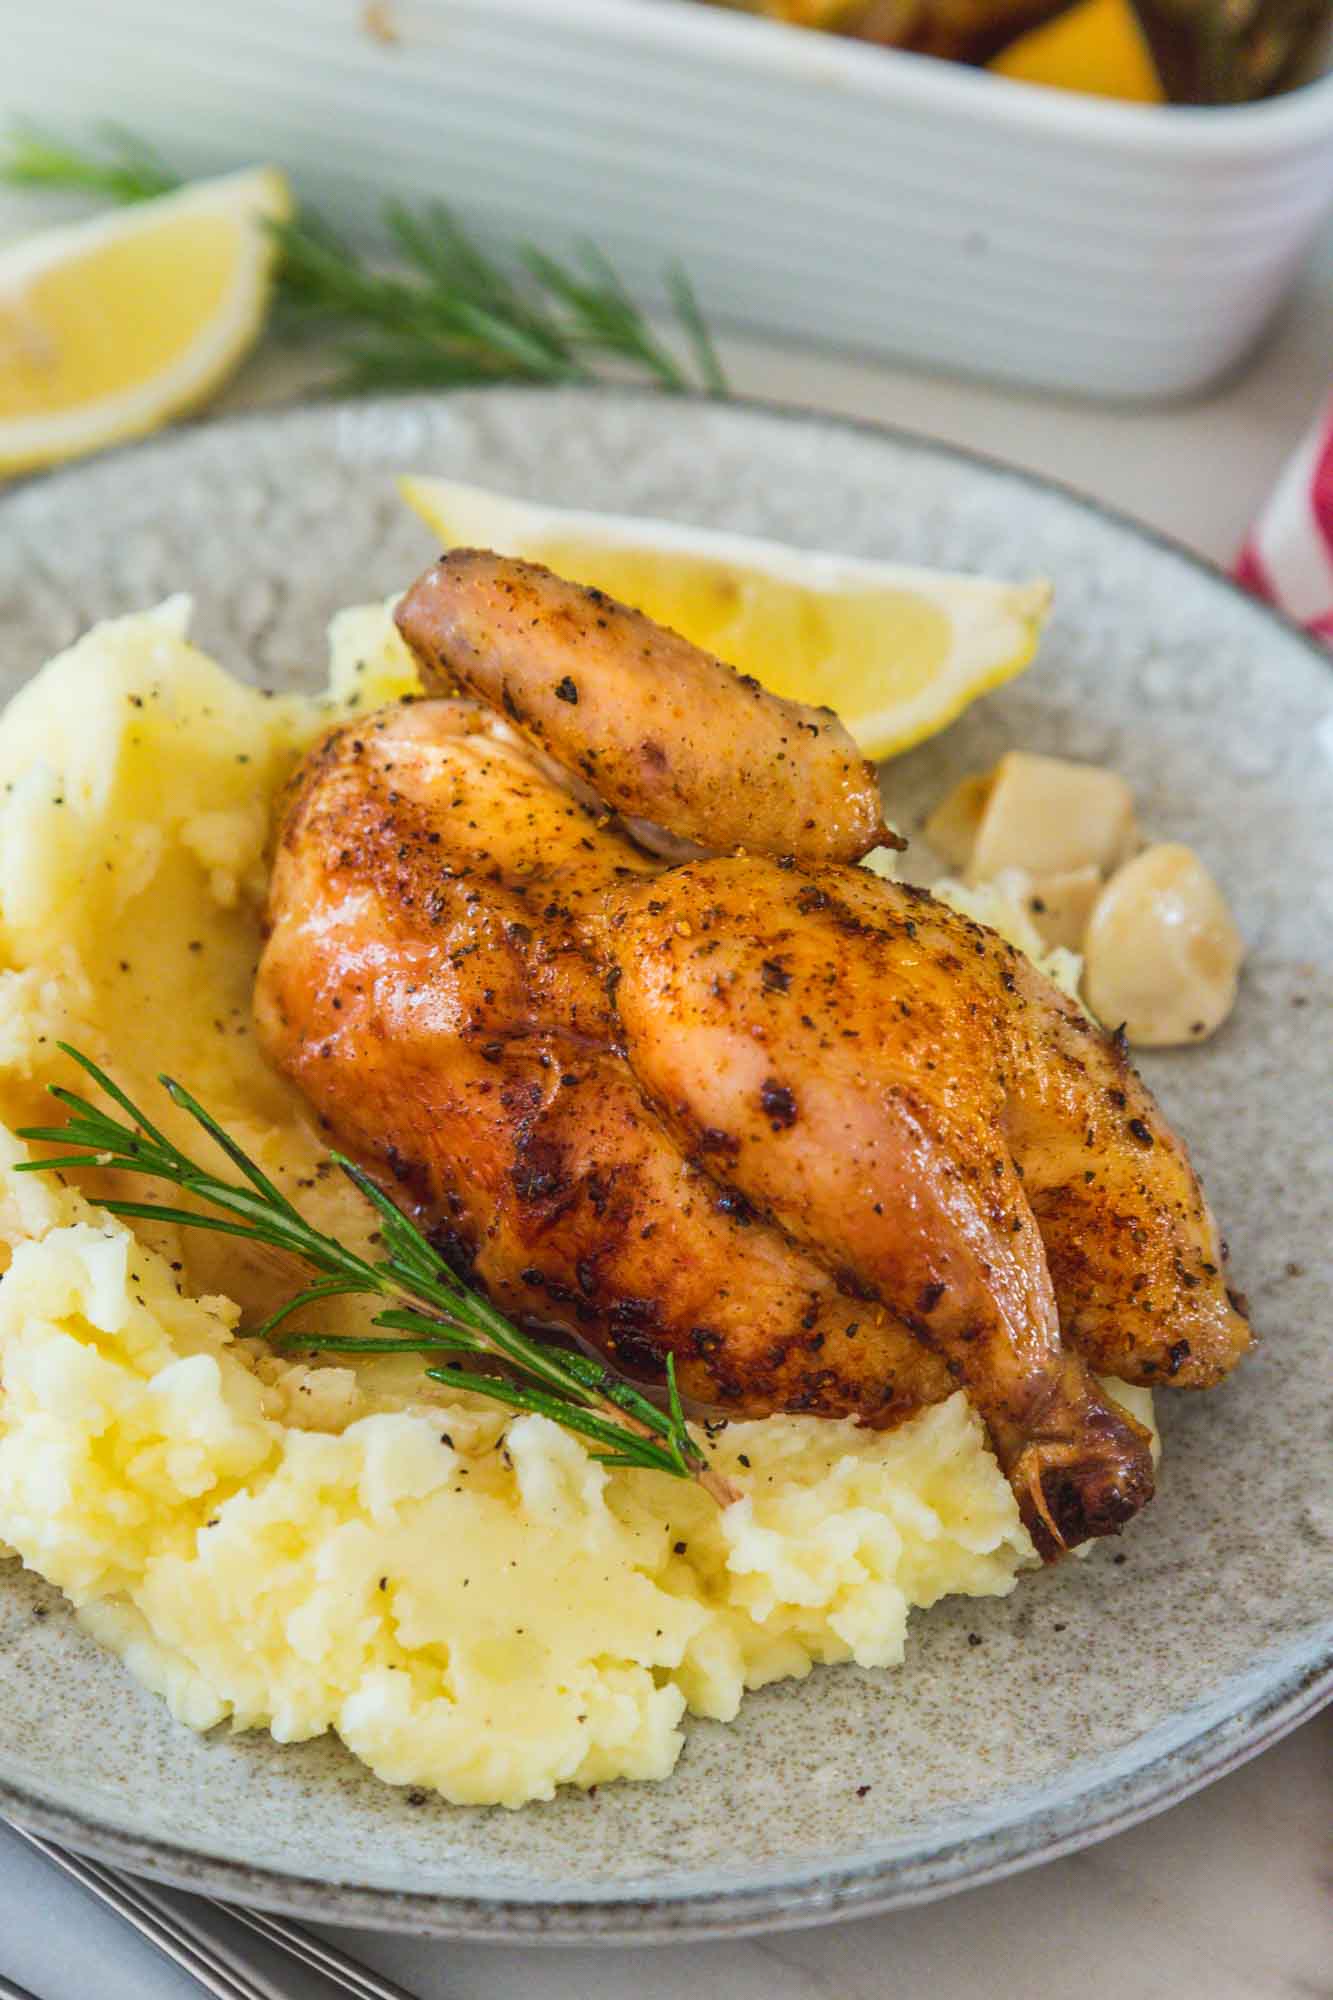 Half a roasted cornish hen served with mashed potatoes